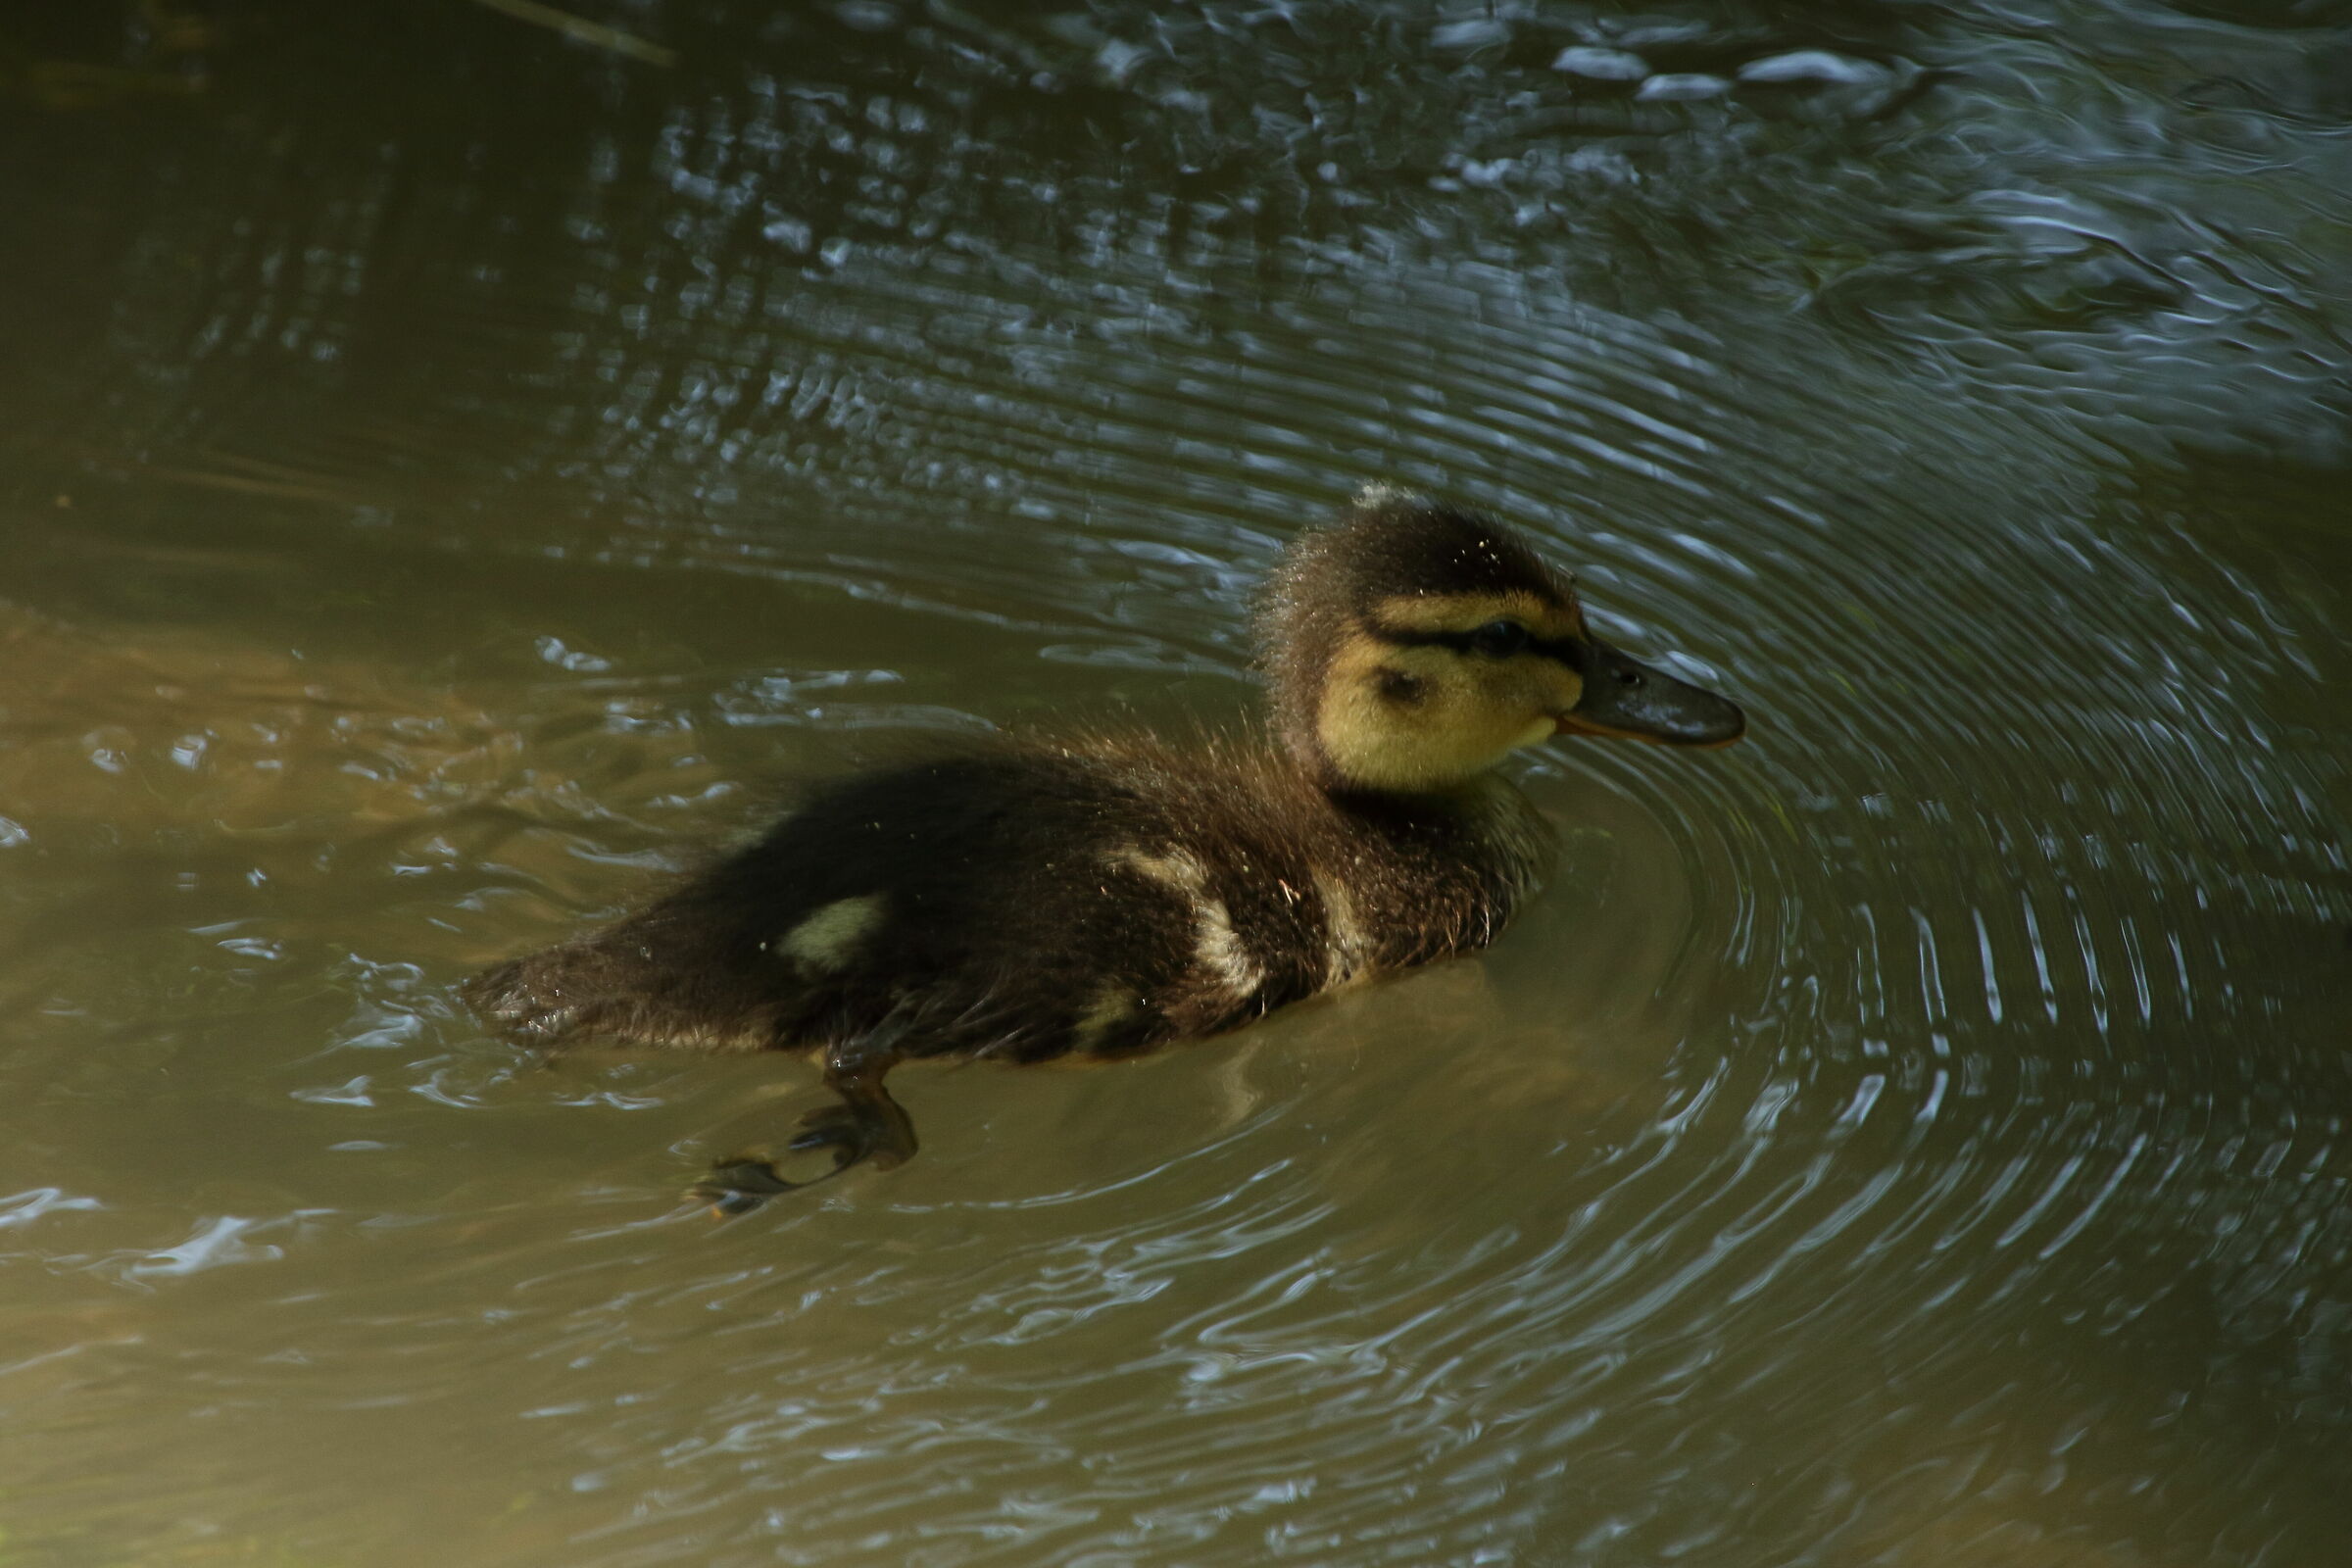 The "ugly" duckling...